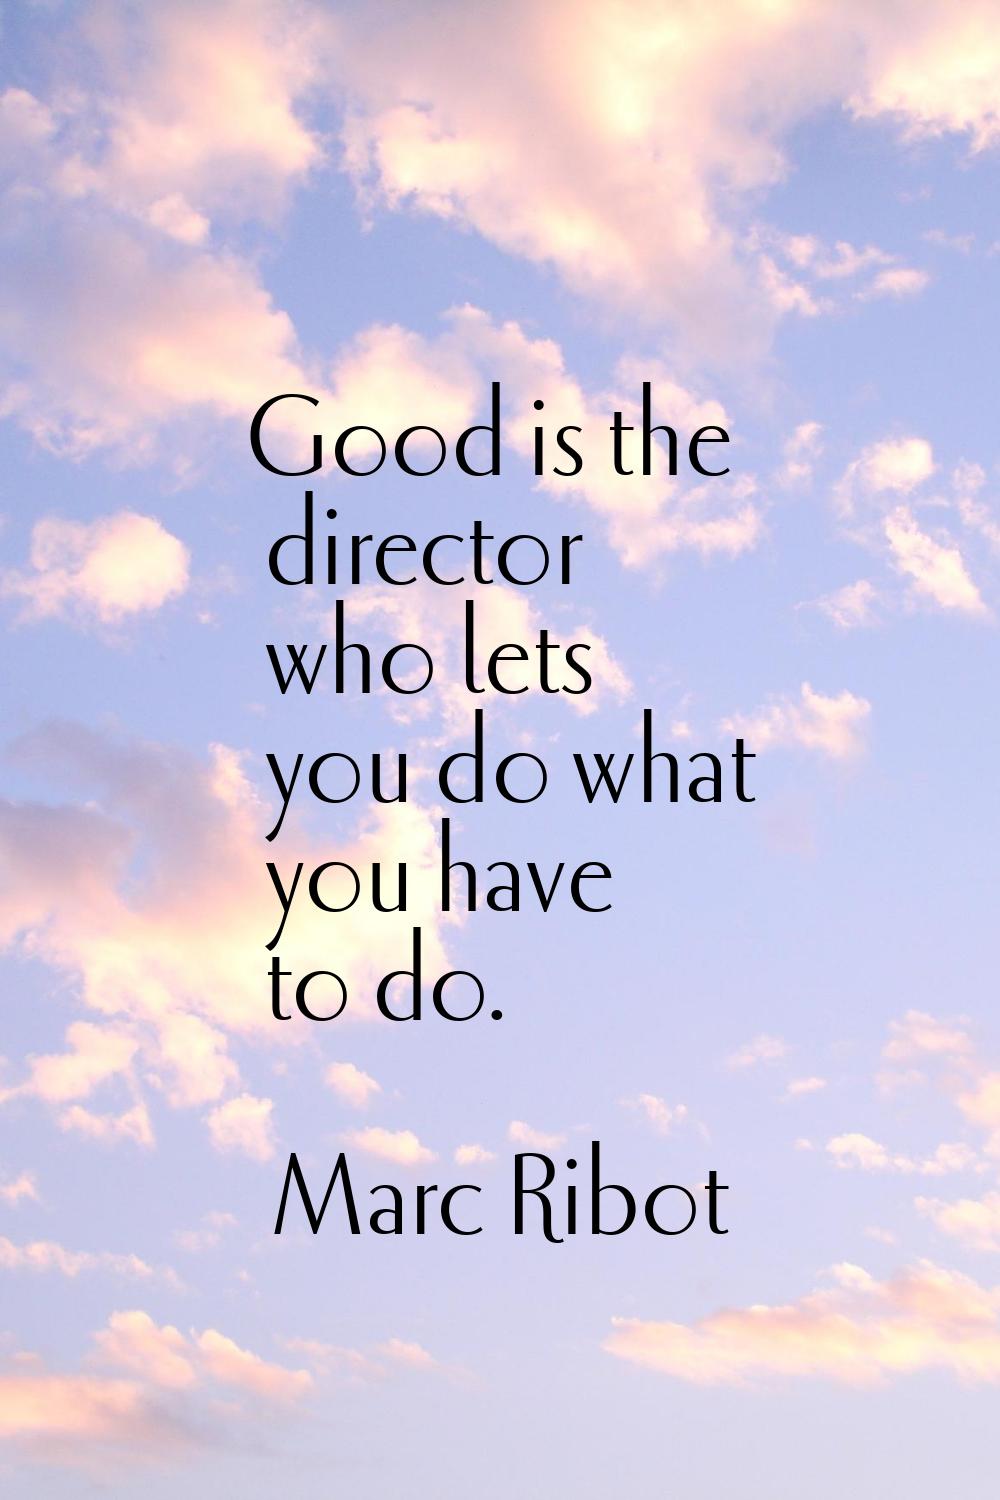 Good is the director who lets you do what you have to do.